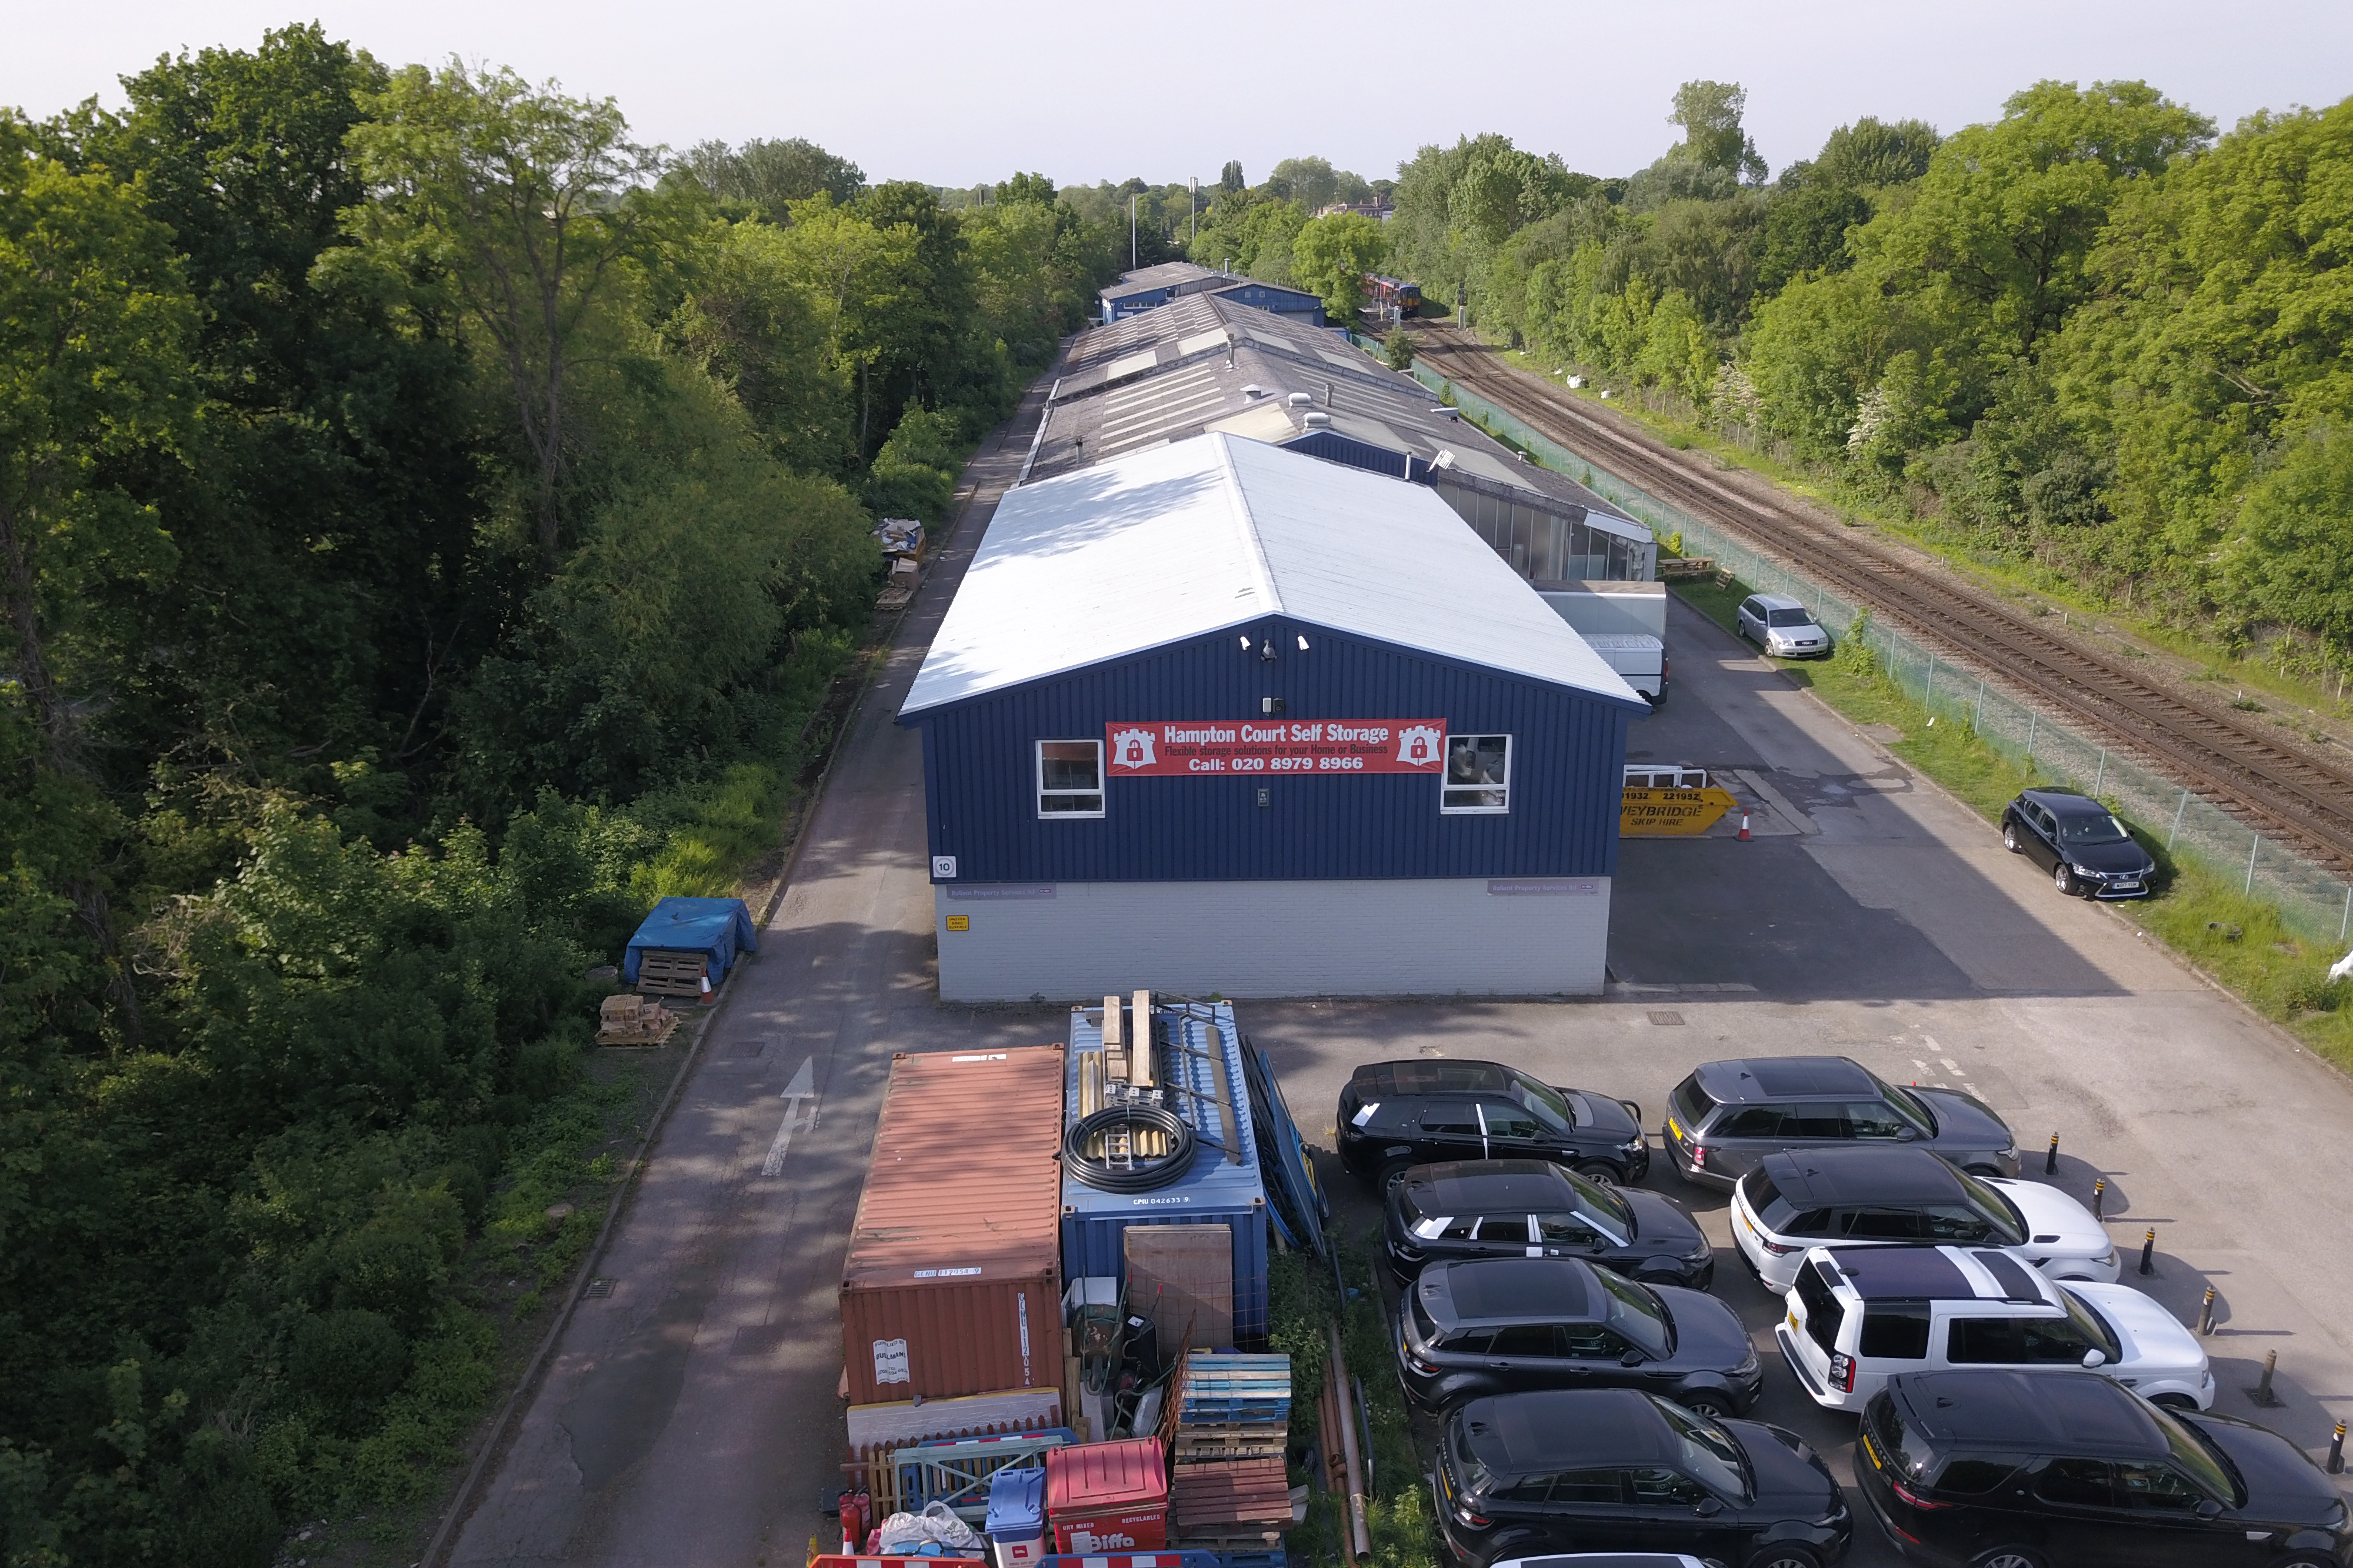 Industrial Estate in Thames Ditton